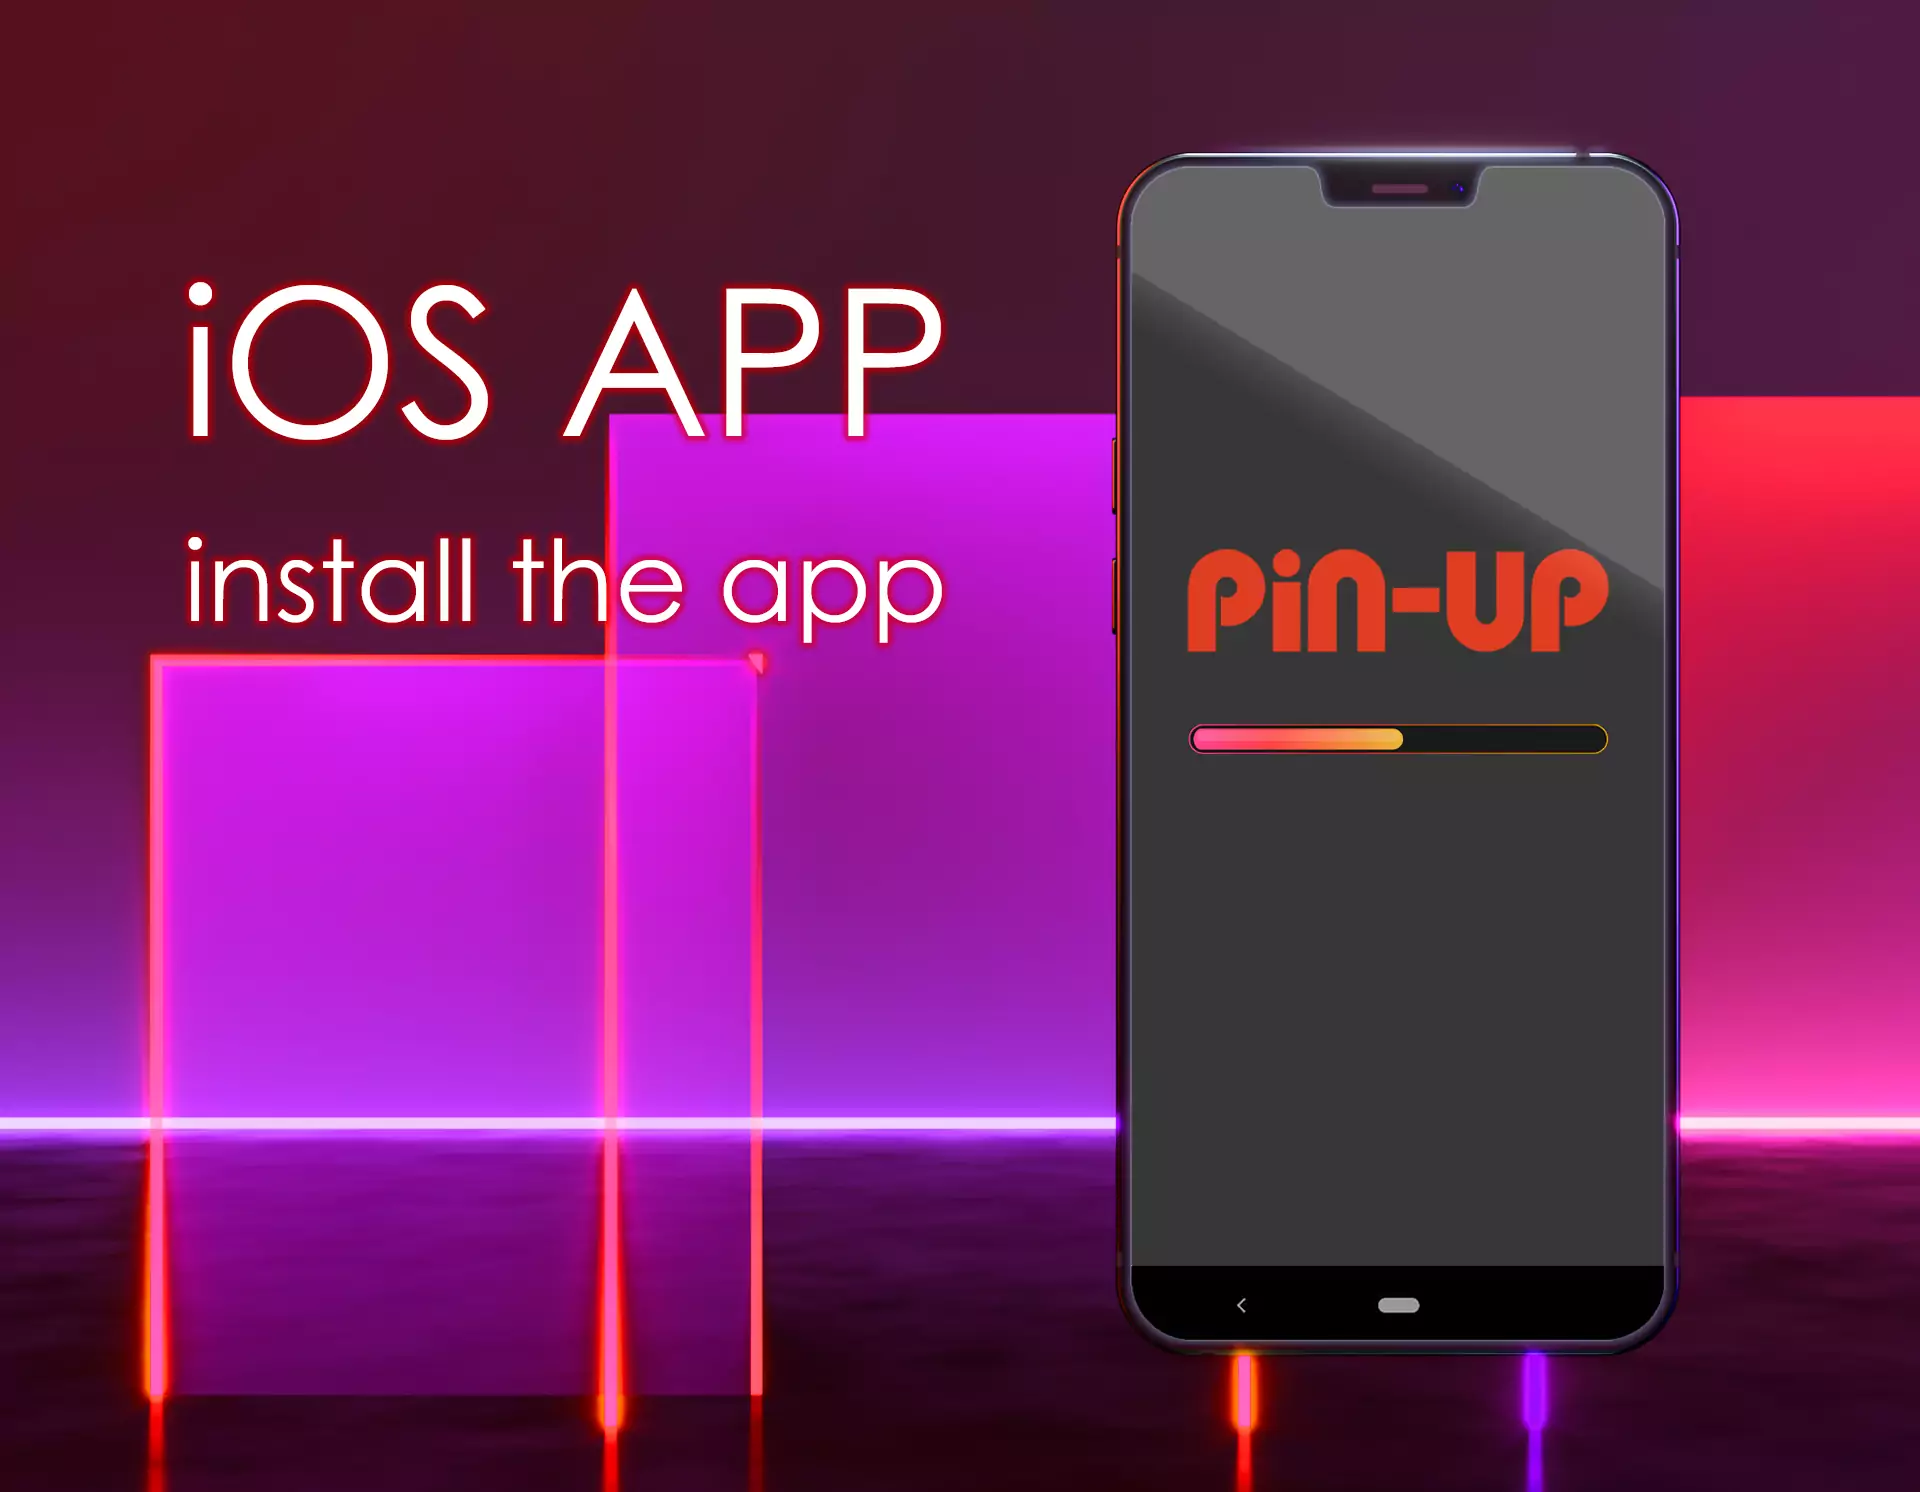 After you download, install the application on your iPhone.